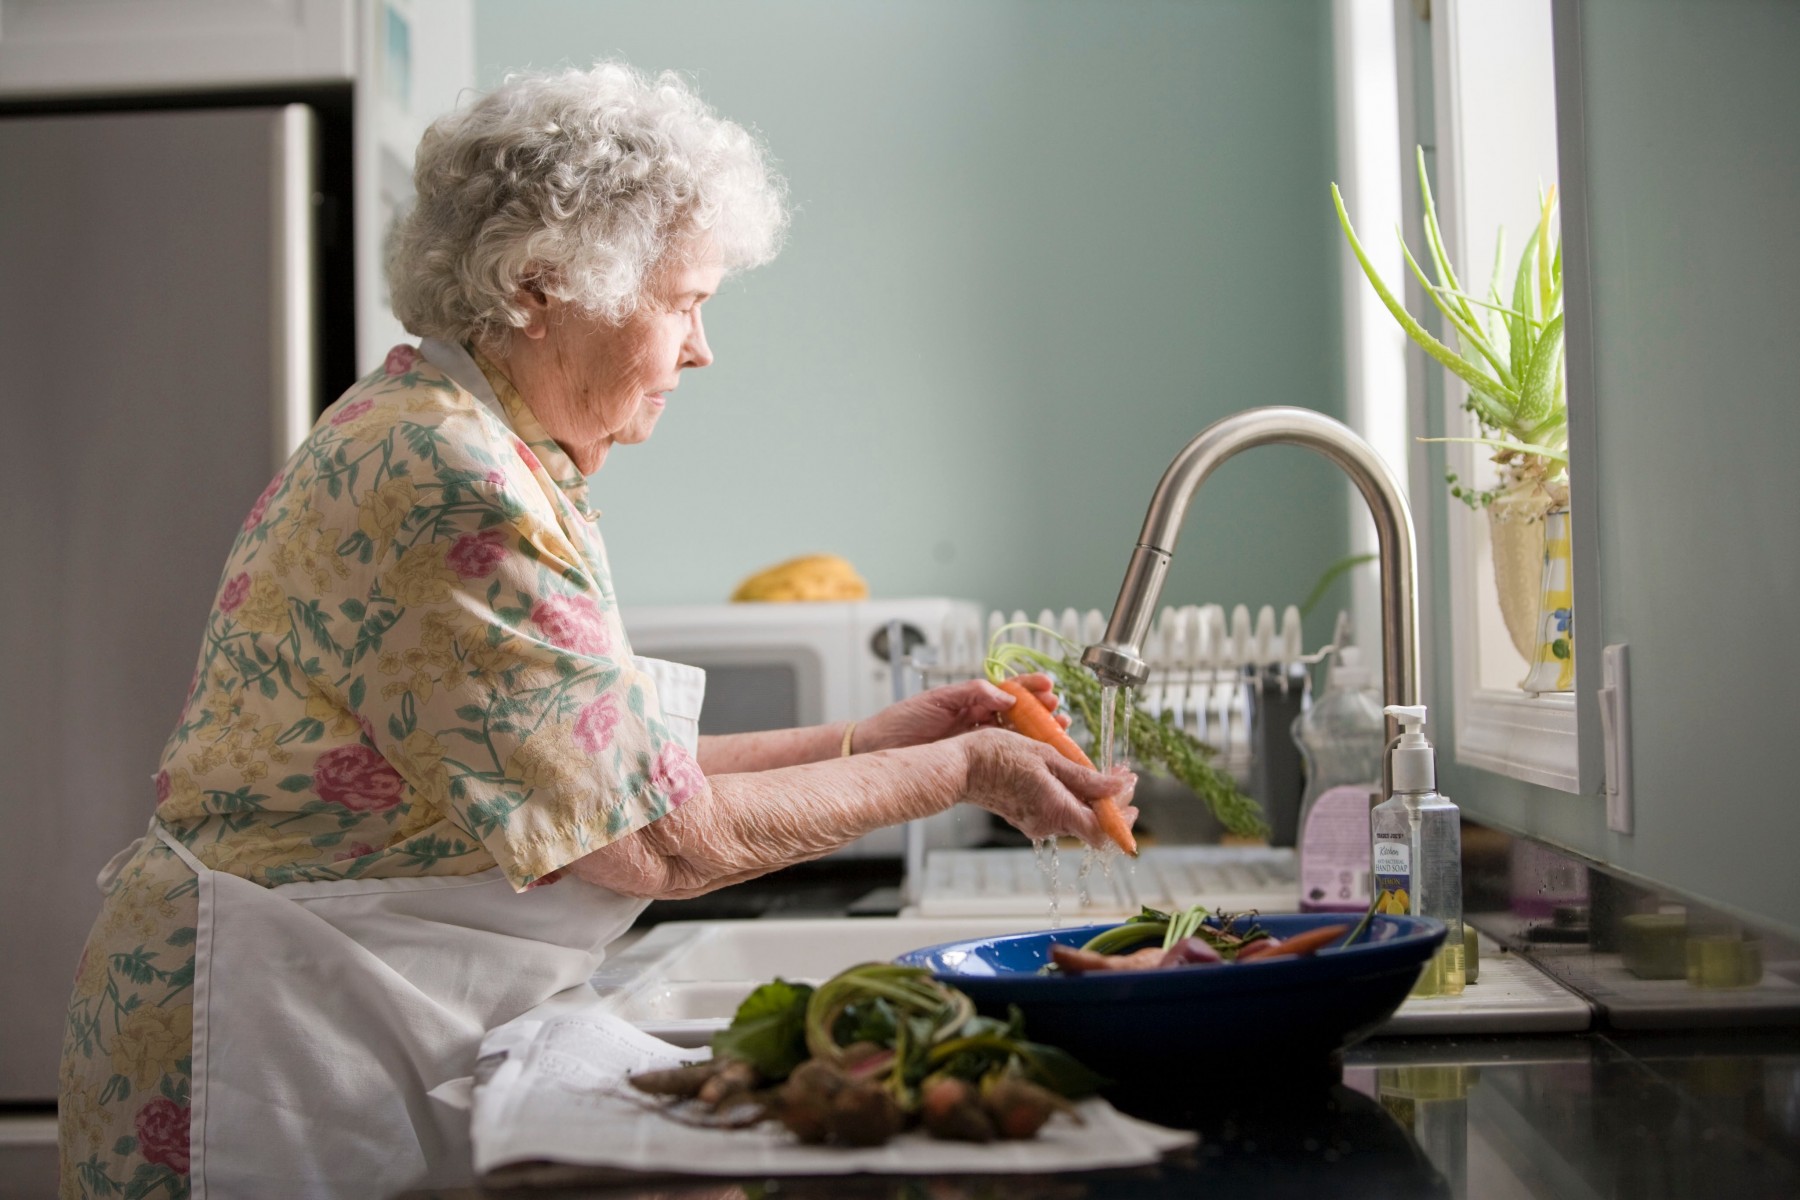 Maintaining Health and Wellbeing: Why Care at Home May Be the Best Option